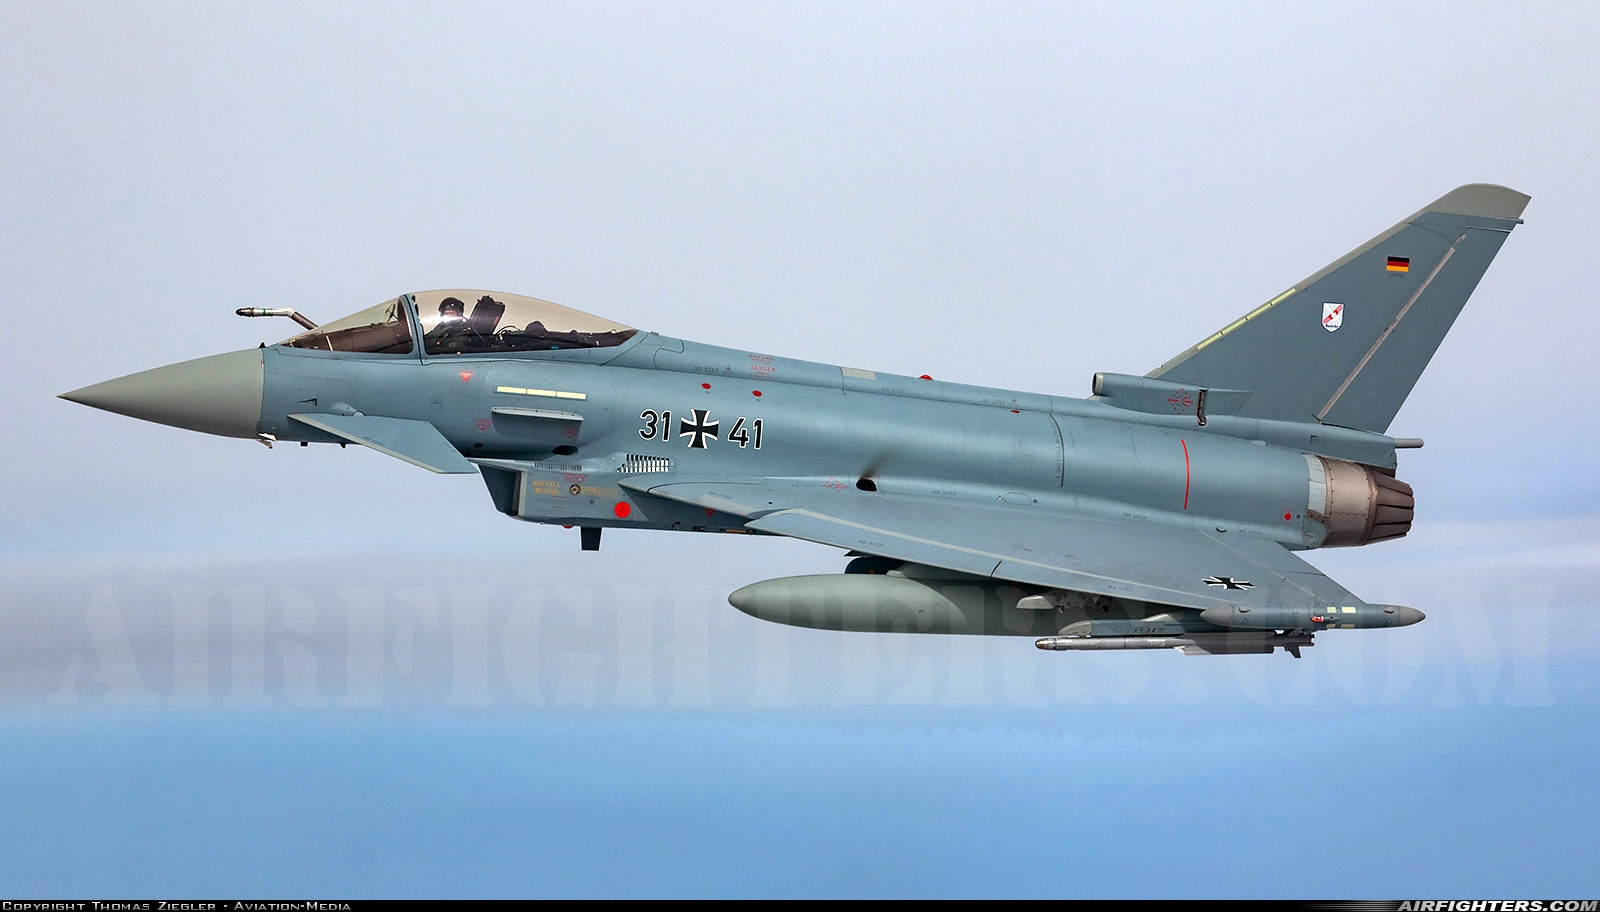 Germany - Air Force Eurofighter EF-2000 Typhoon S 31+41 at North Sea, International Airspace